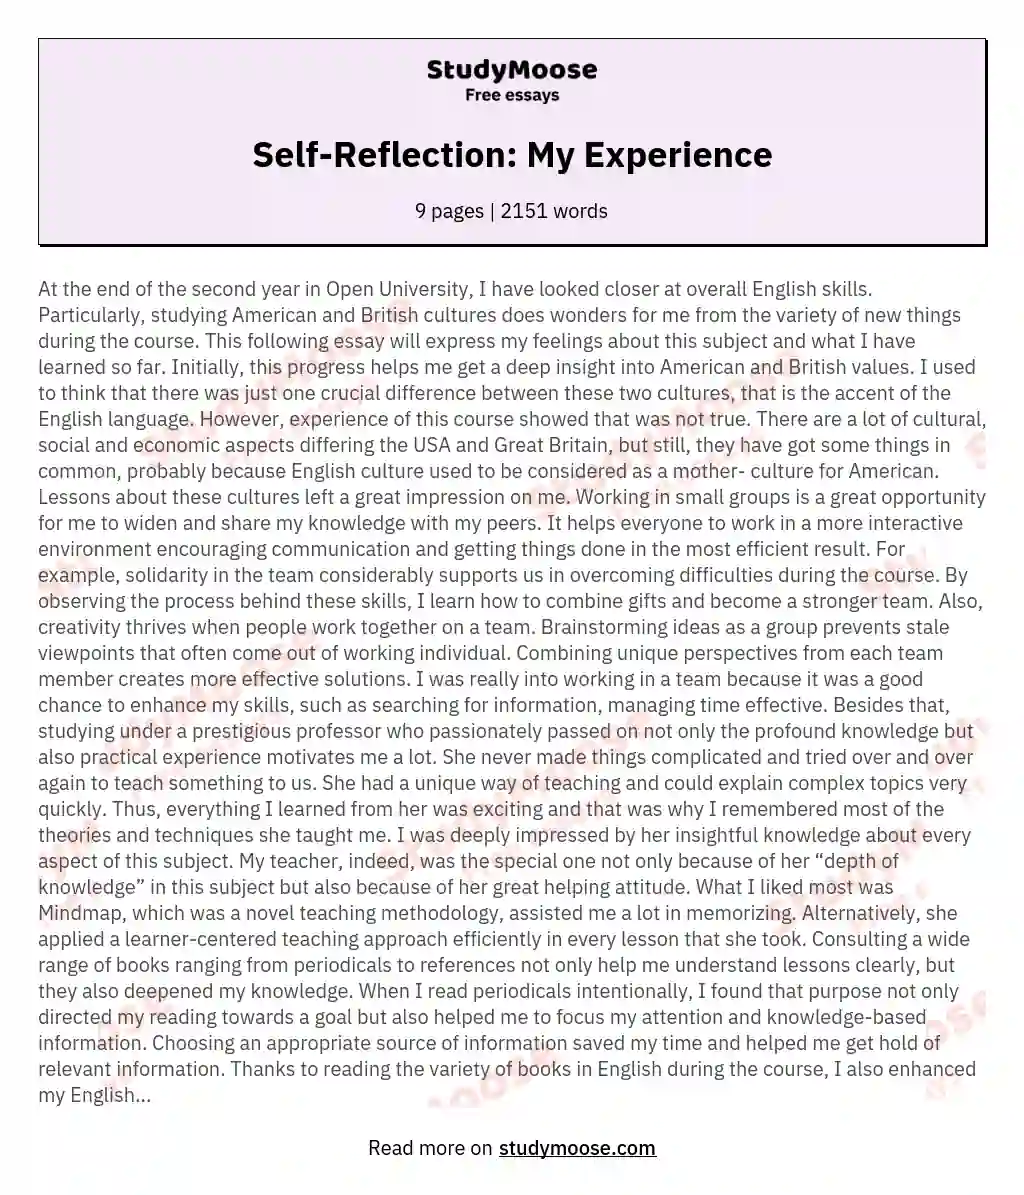 Self-Reflection: My Experience essay